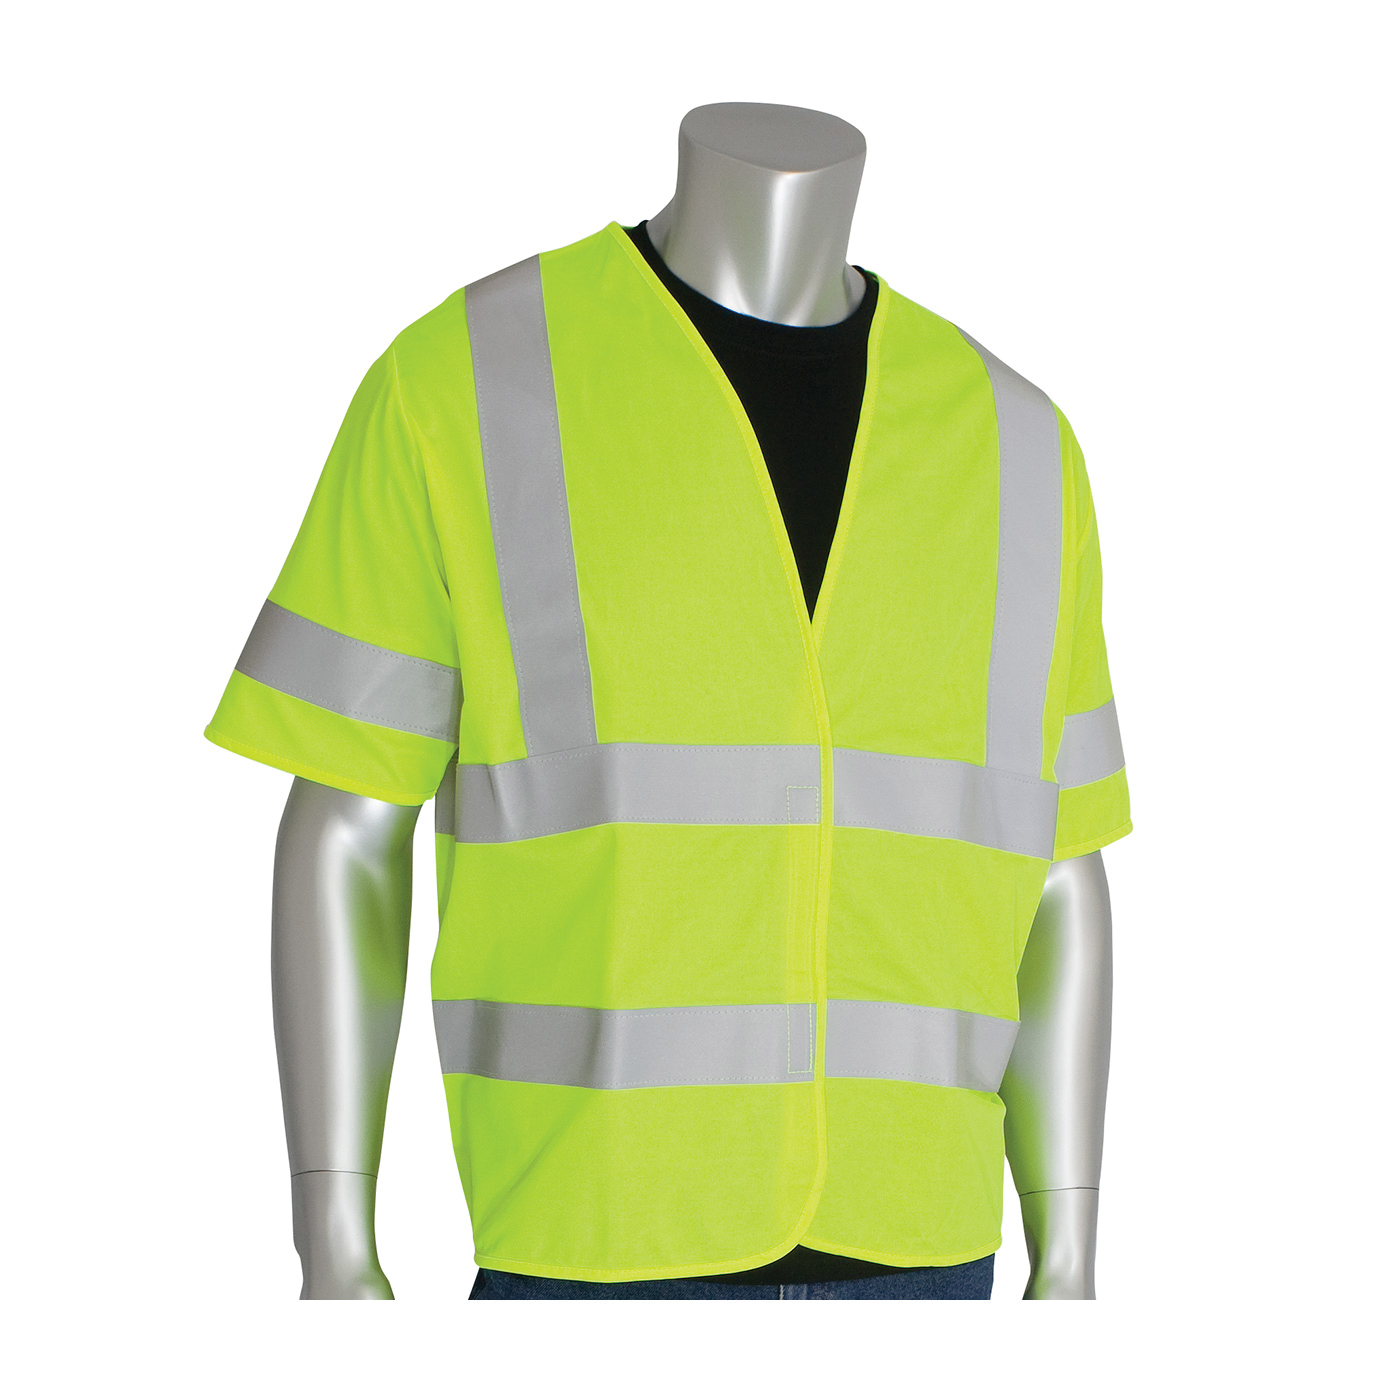 PIP® SafetyGear 305-HSSVFRLY-2X/3X FR Treated Standard Solid Vest, 2XL/3XL, Hi-Viz Yellow, Polyester, Hook and Loop Closure, ANSI Class: Class 3, Specifications Met: ANSI/ISEA 107